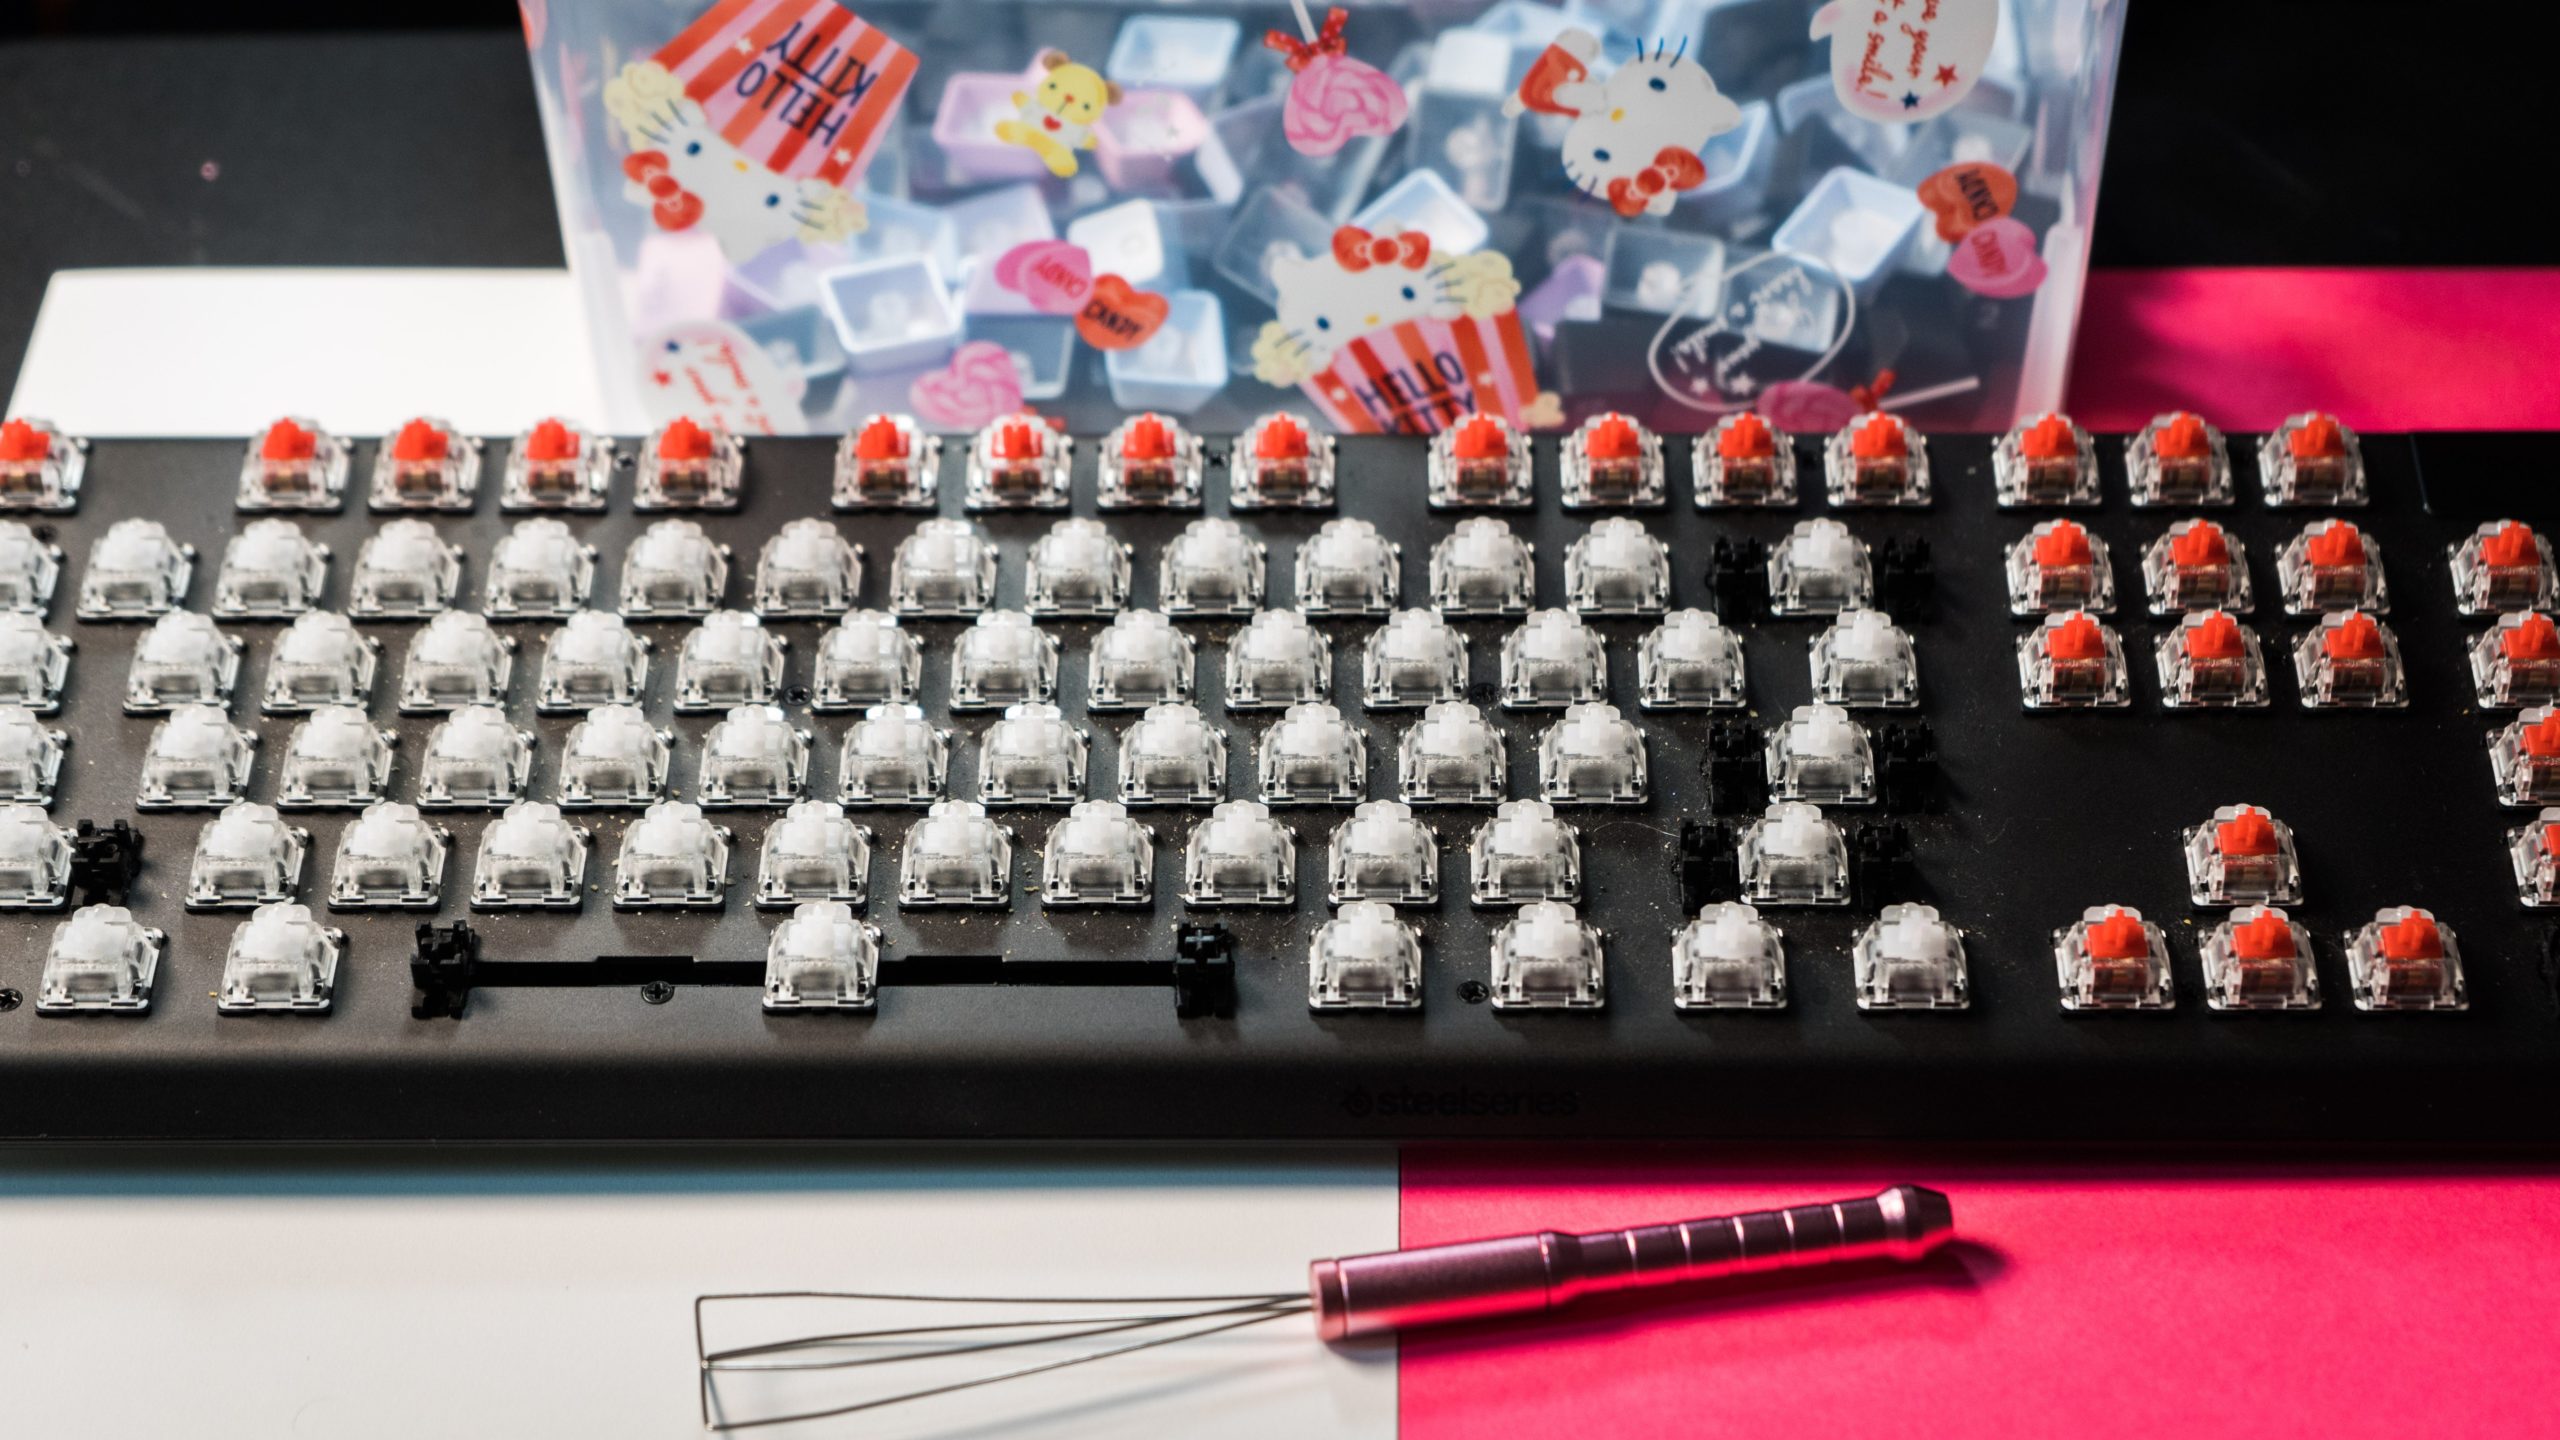 Stripping off the keycaps is the major part of cleaning a mechanical keyboard. But some manufacturers let you take the whole thing apart for a deeper clean.  (Photo: Florence Ion / Gizmodo)